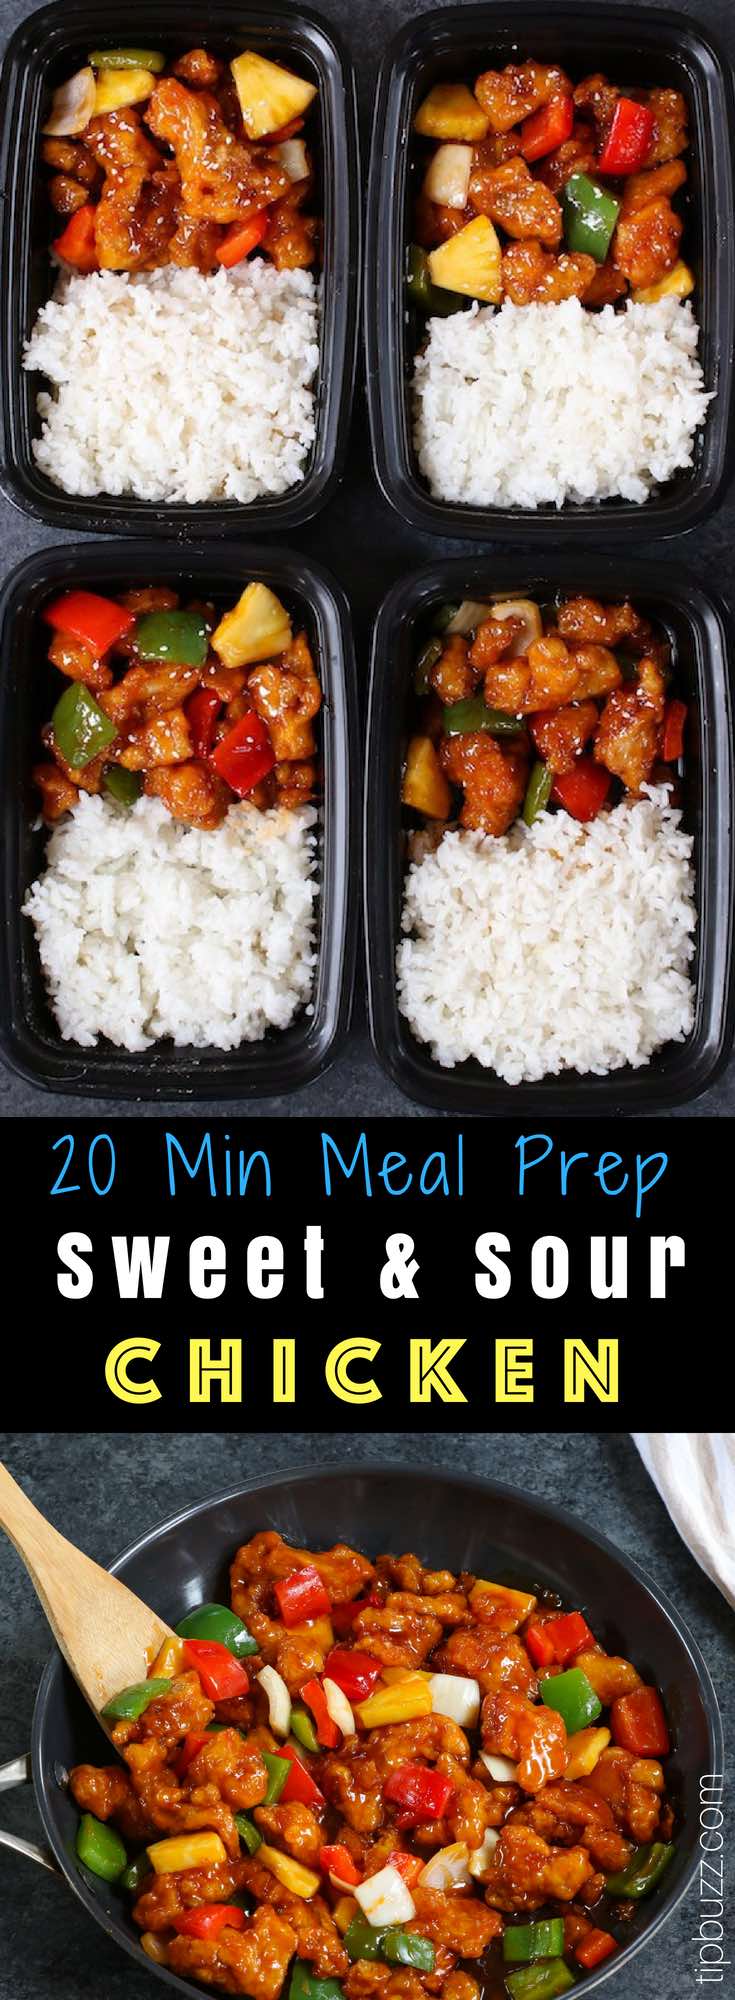 This Sweet and Sour Chicken is tender and crispy with bell peppers and pineapple in an irresistible sweet and sour sauce. It's ready in just 20 minutes and makes a quick weeknight dinner that's so much better than takeout from Chinese restaurants! #SweetAndSourChicken #MealPrep #ChickenMealPrep